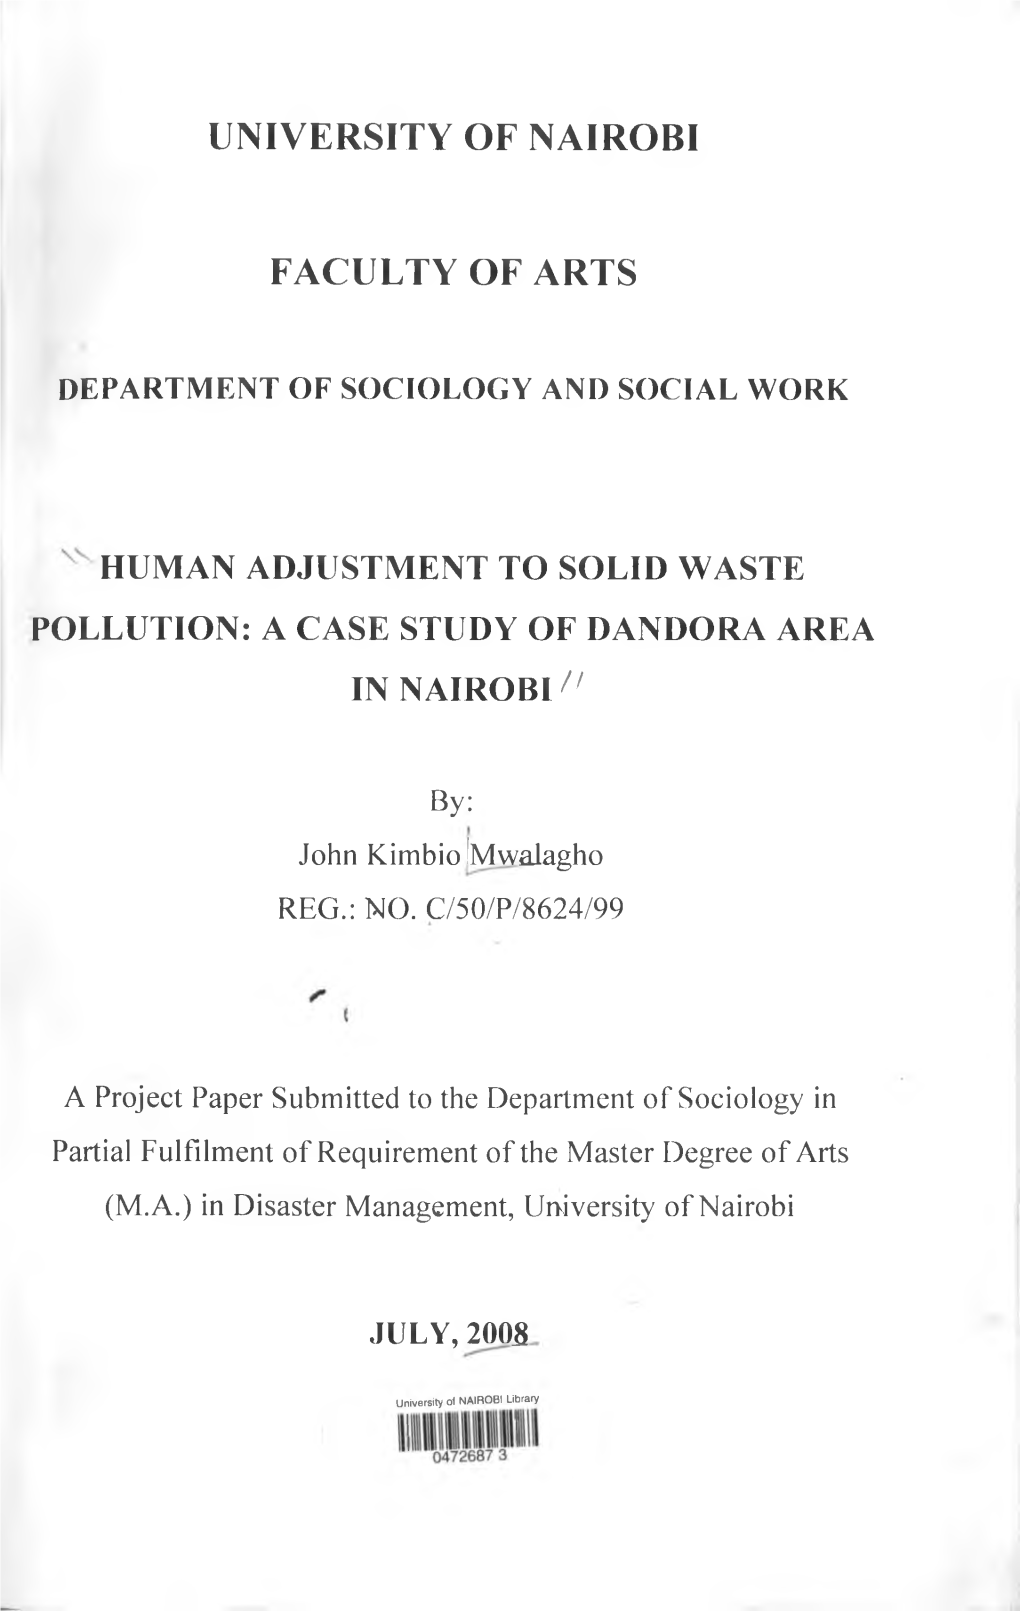 HUMAN ADJUSTMENT to SOLID WASTE POLLUTION: a CASE STUDY of DANDORA AREA in NAIROBI F*